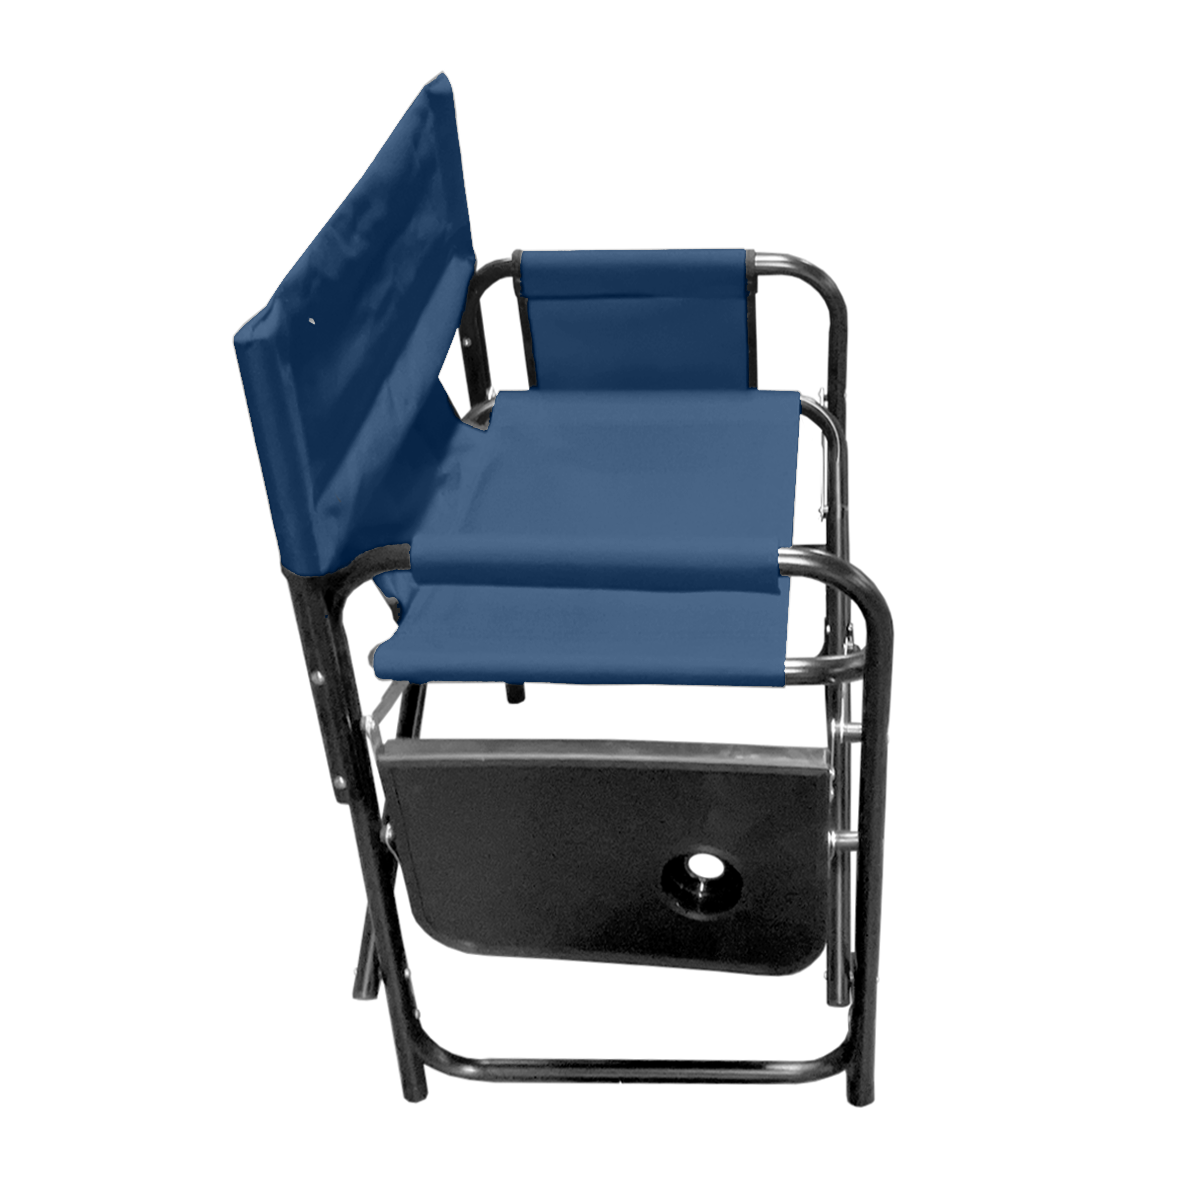 Folding Directors Chair Outdoor Camping Chair with Side Table & Pockets, Blue